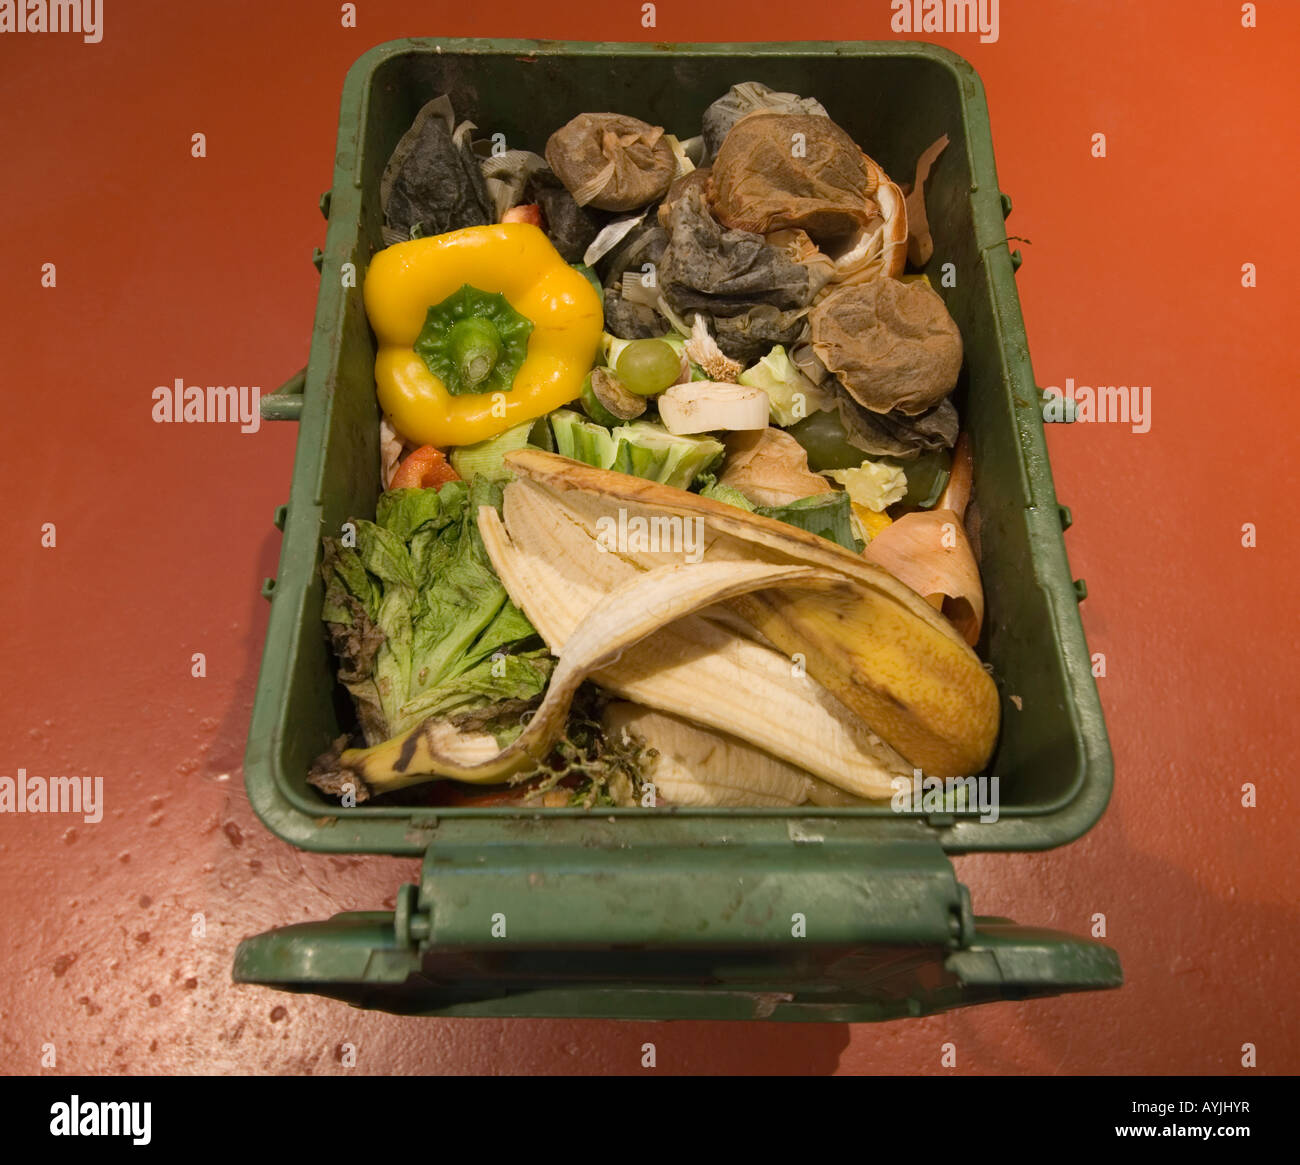 waste green food in a kitchen compost bin Stock Photo